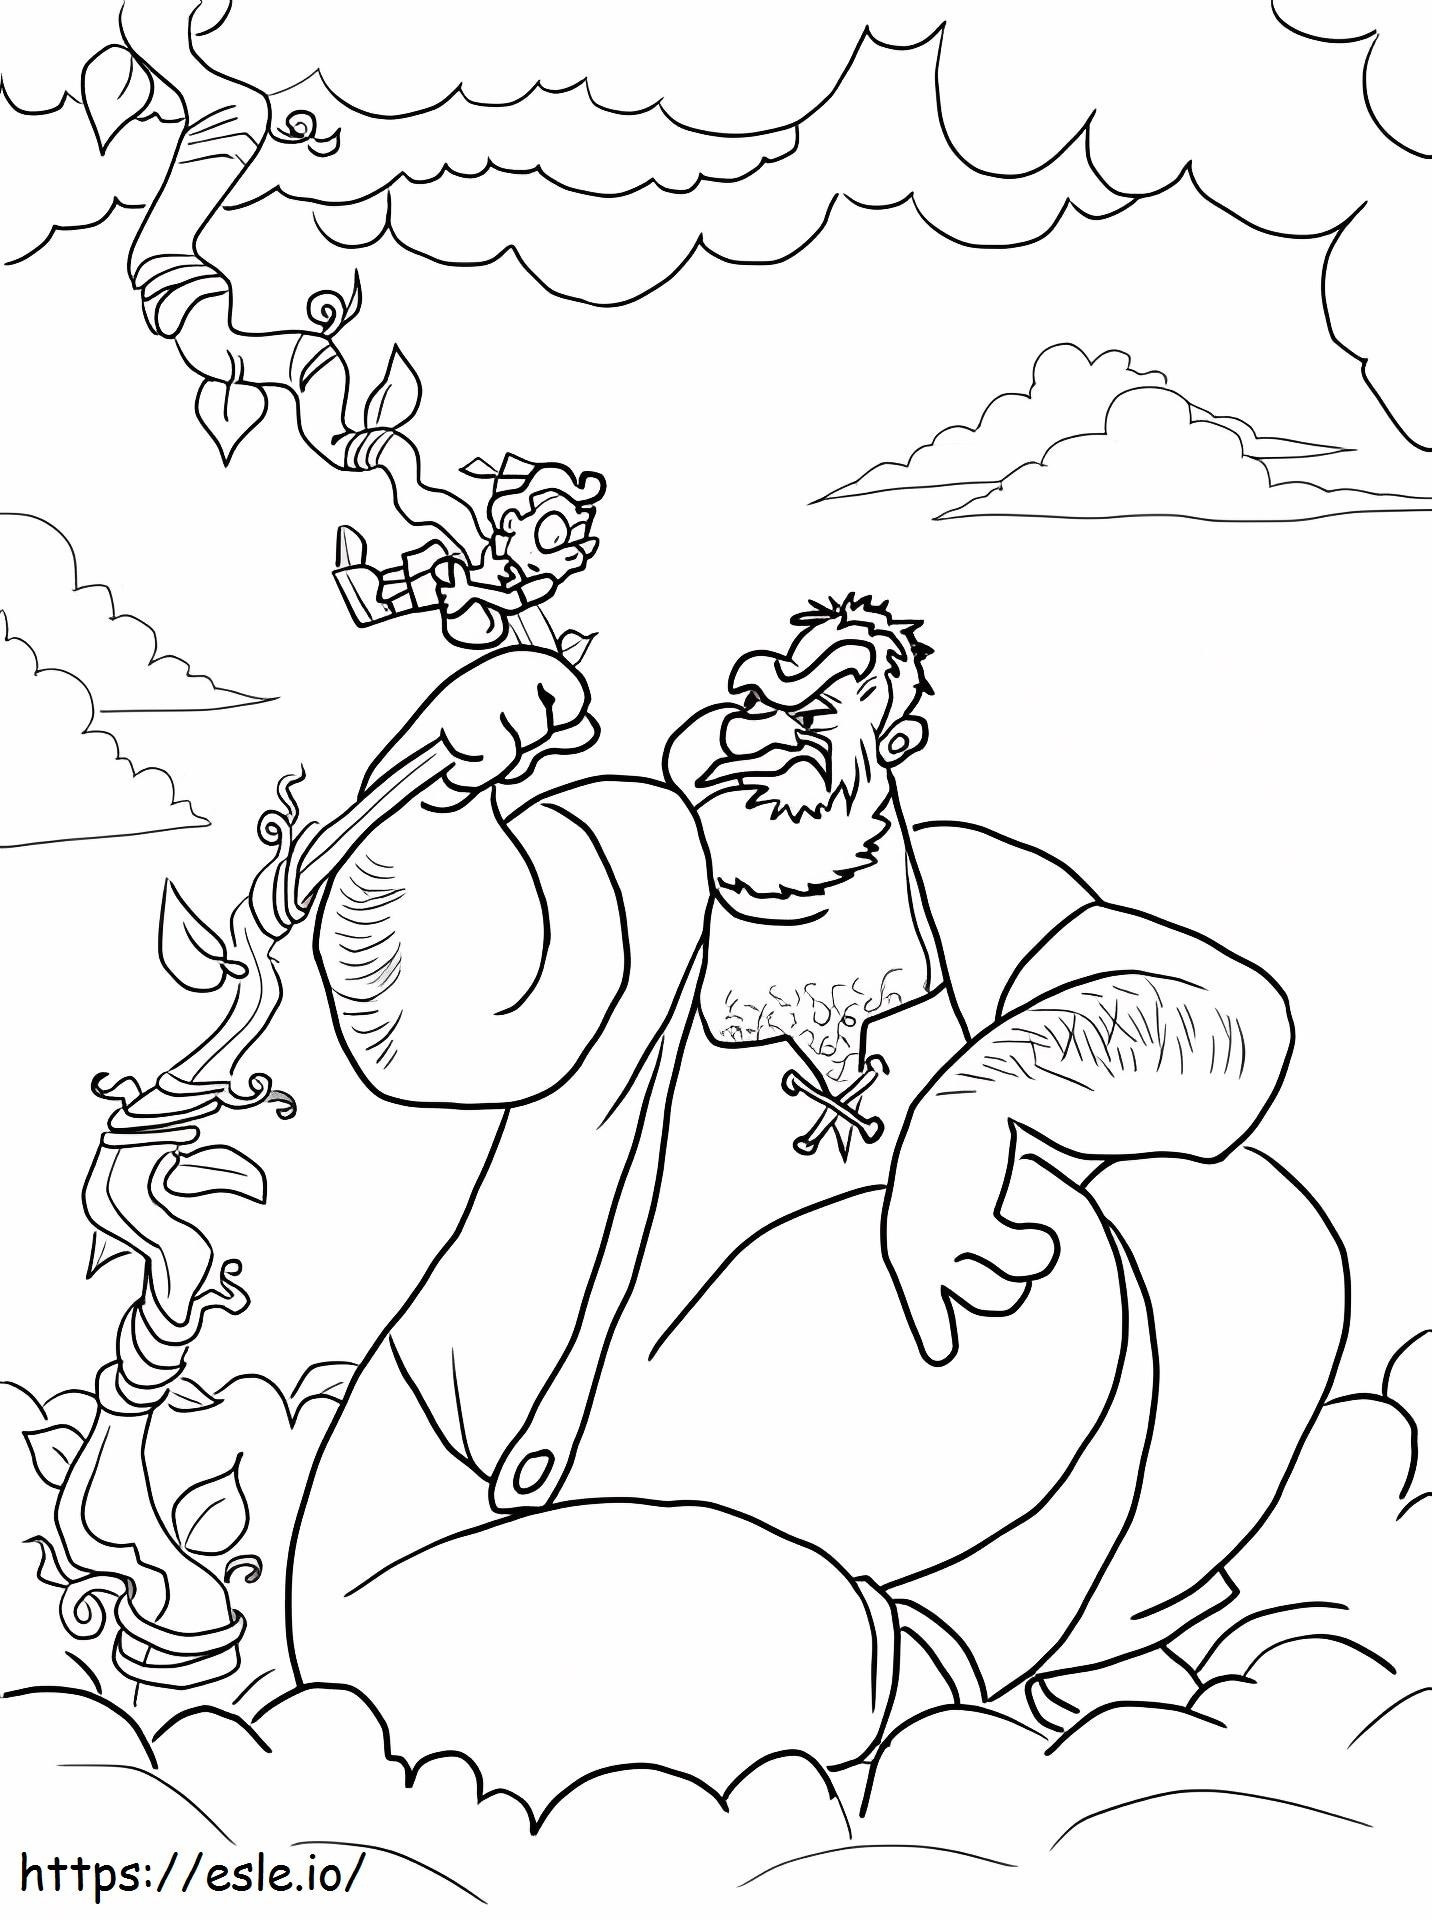 Jack And The Giant Beanstalk coloring page